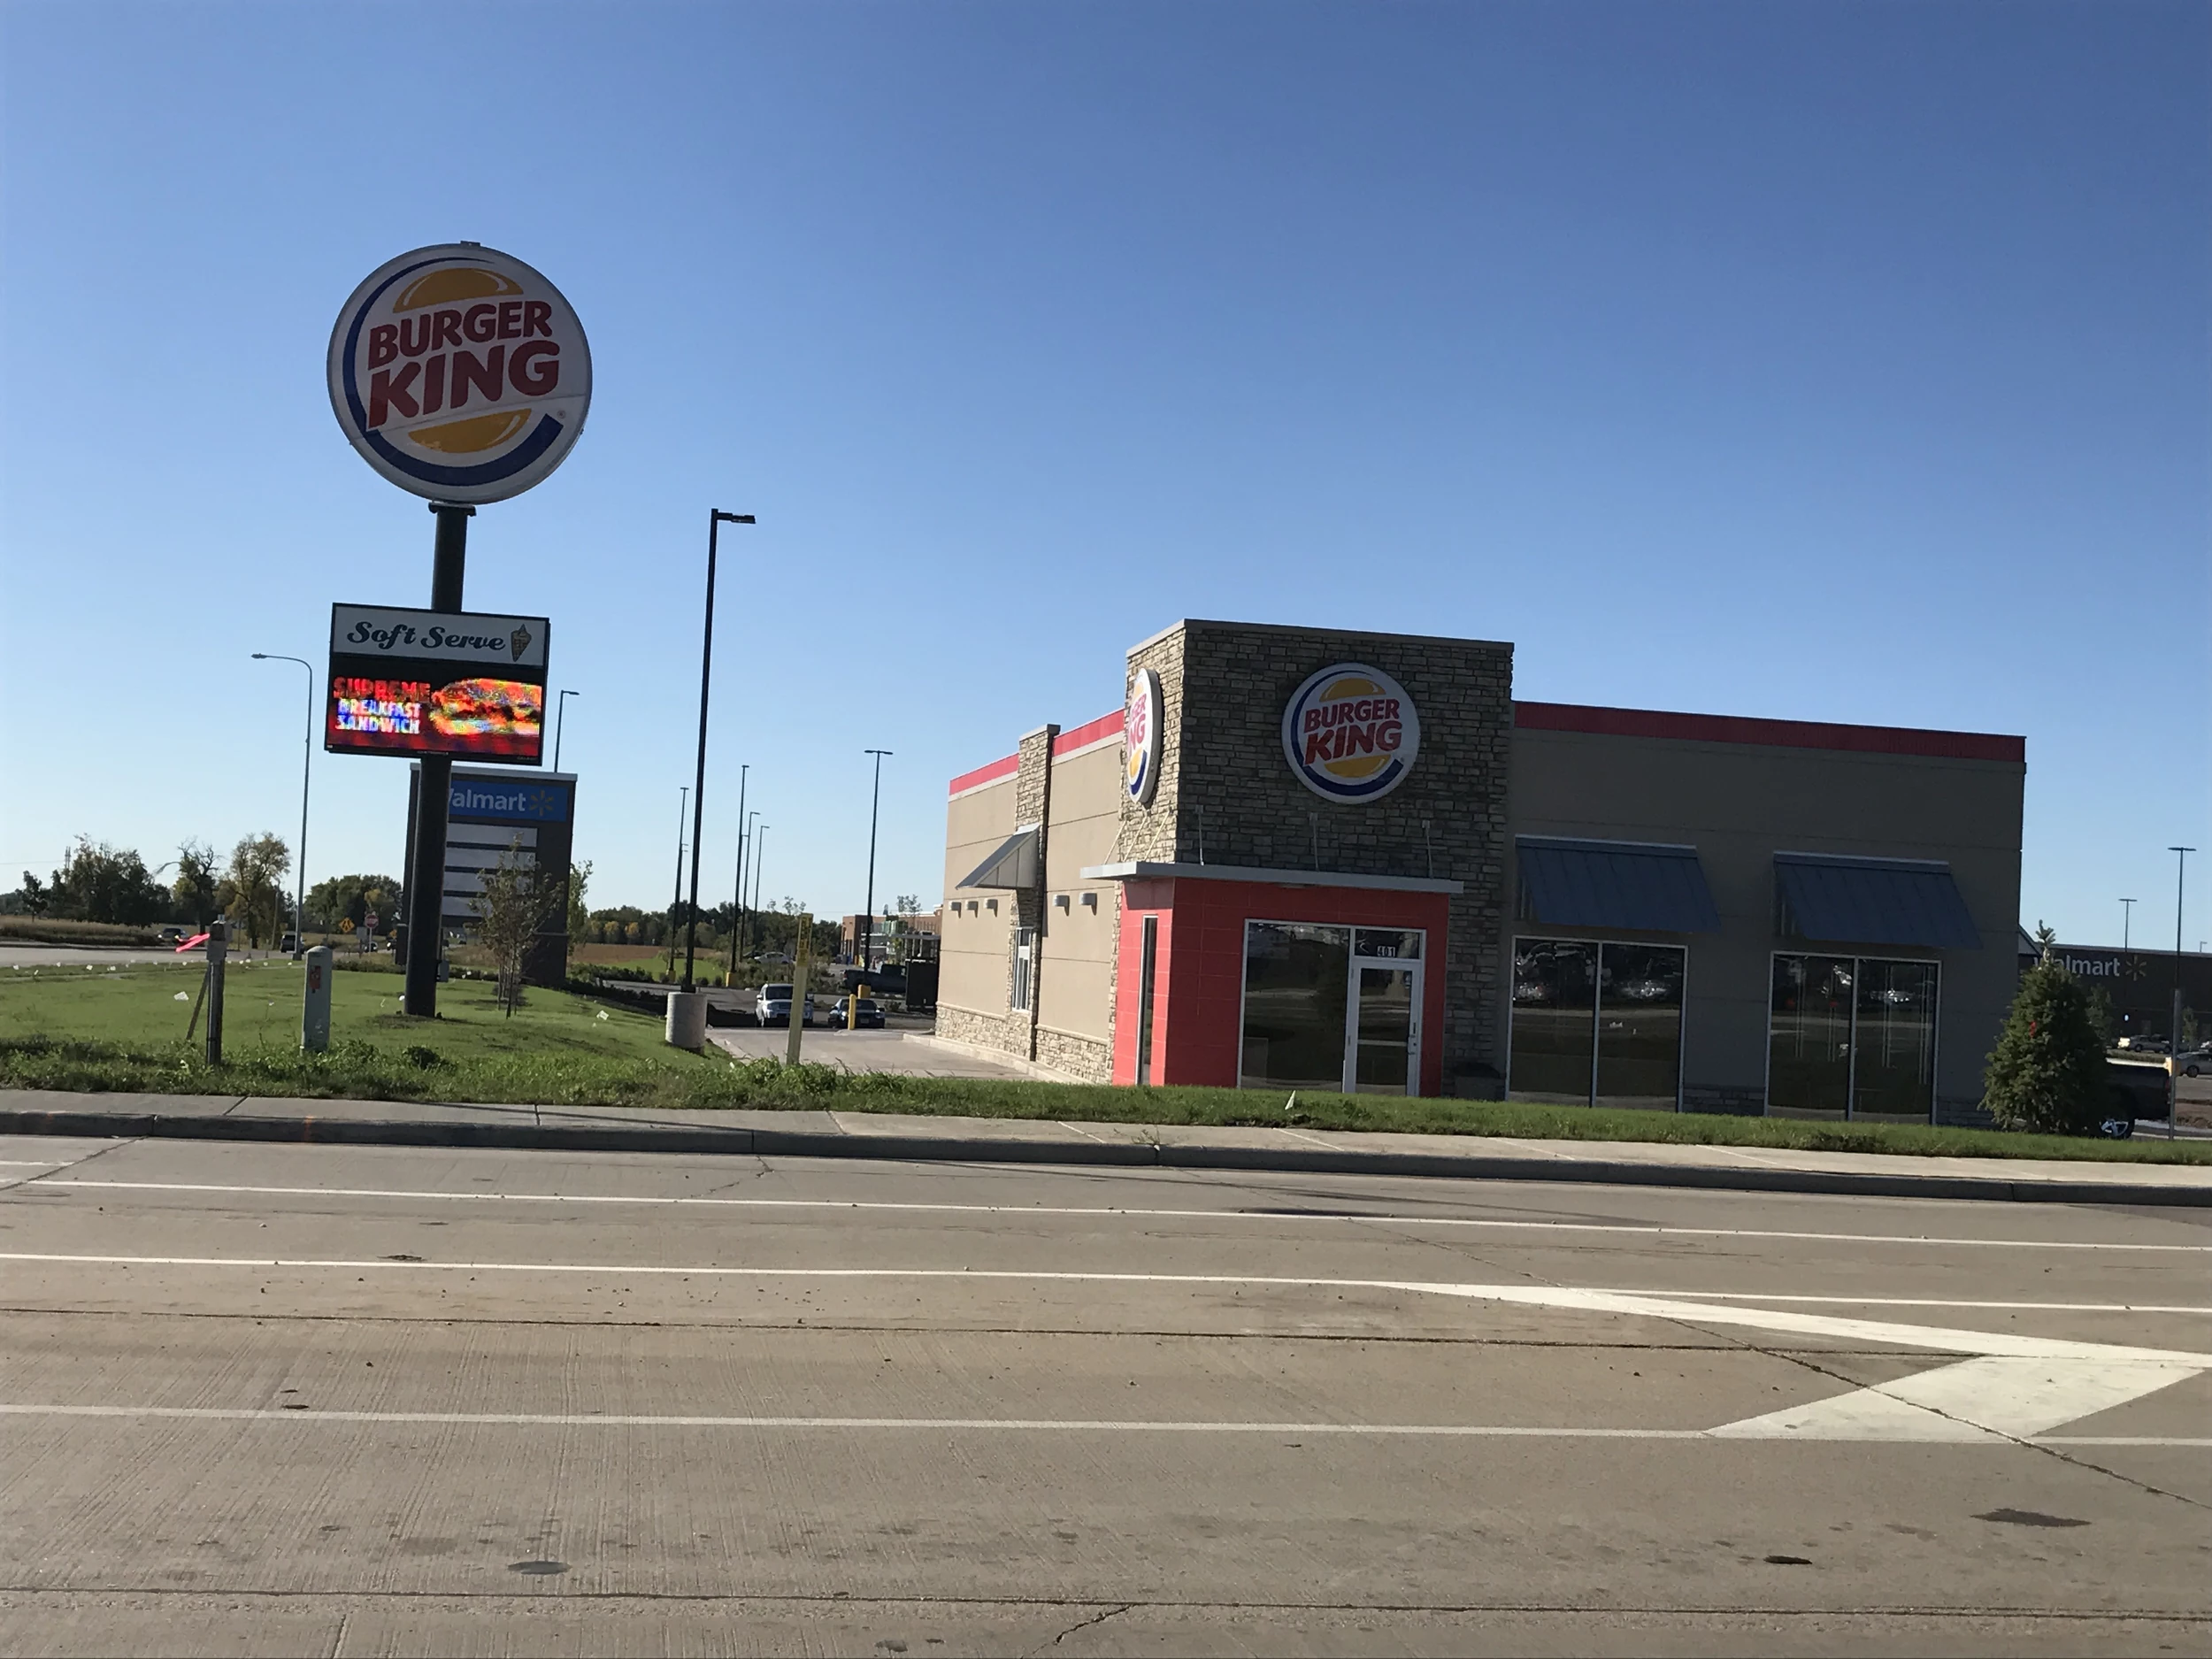 ICYMI New Burger King Location Open image